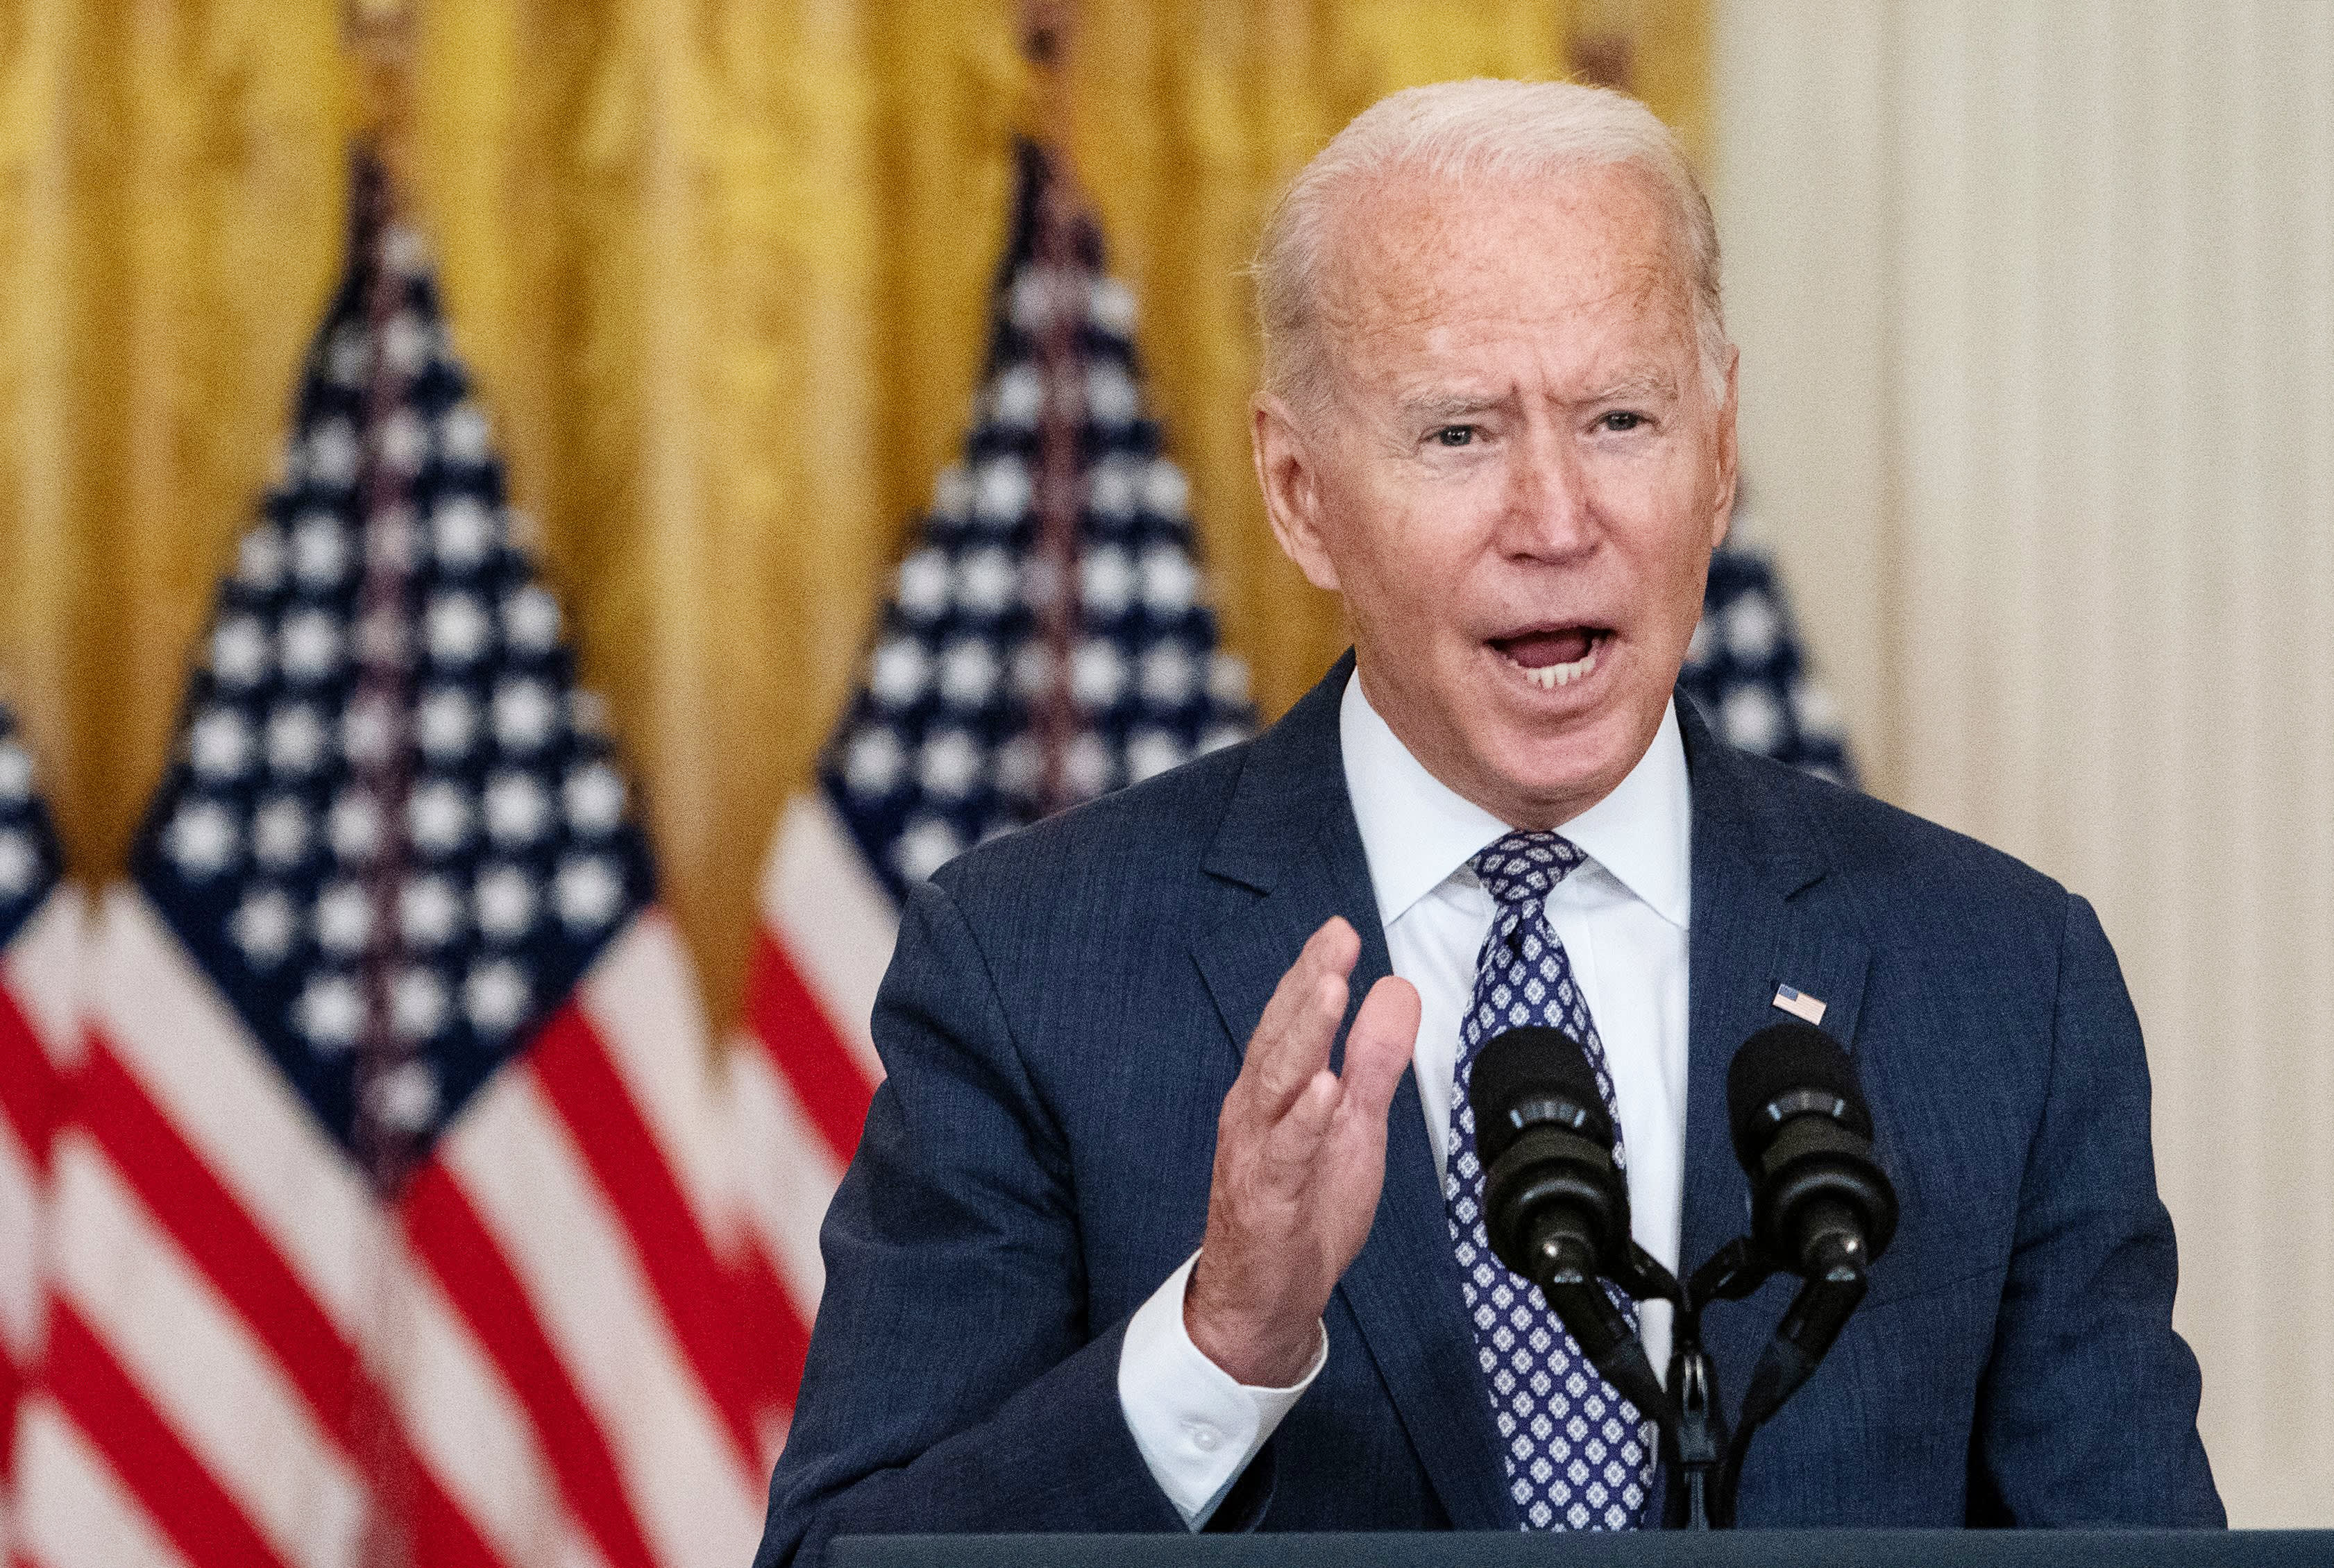 Biden says U.S. has 'long way to go and a lot could still go wrong' in Afghanistan evacuation